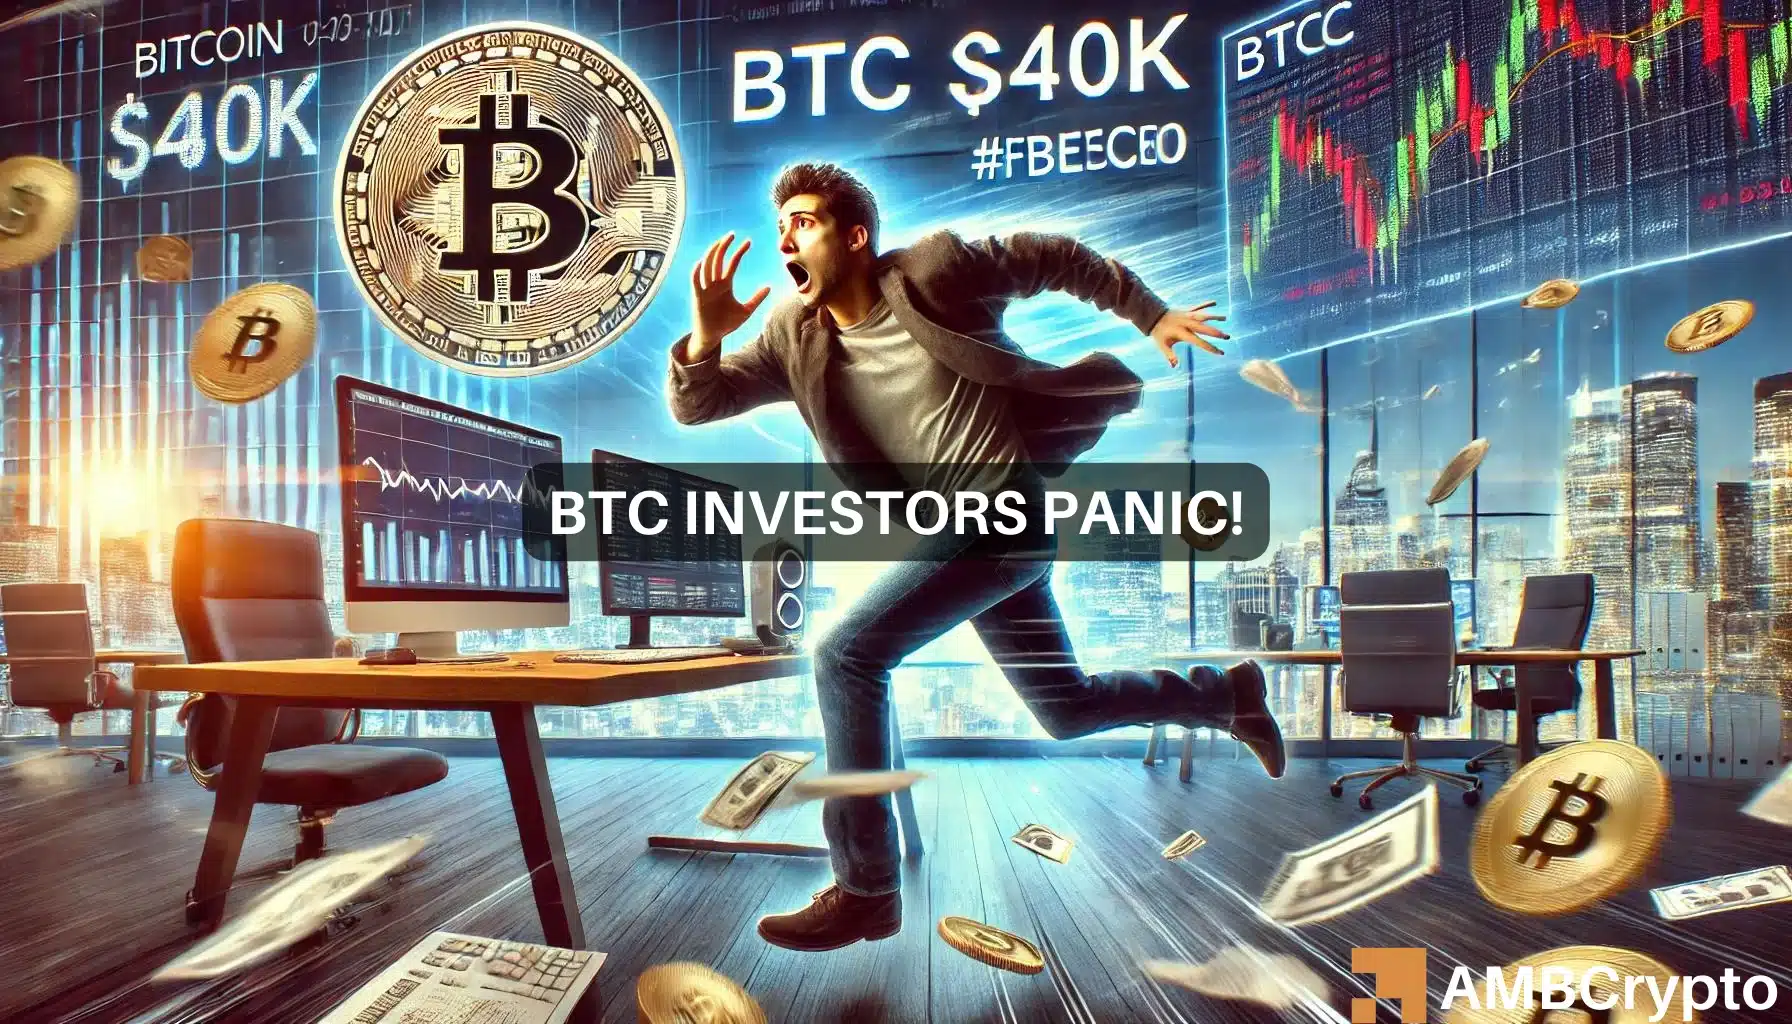 Will Bitcoin crash to $40K? Why investors are in a state of panic